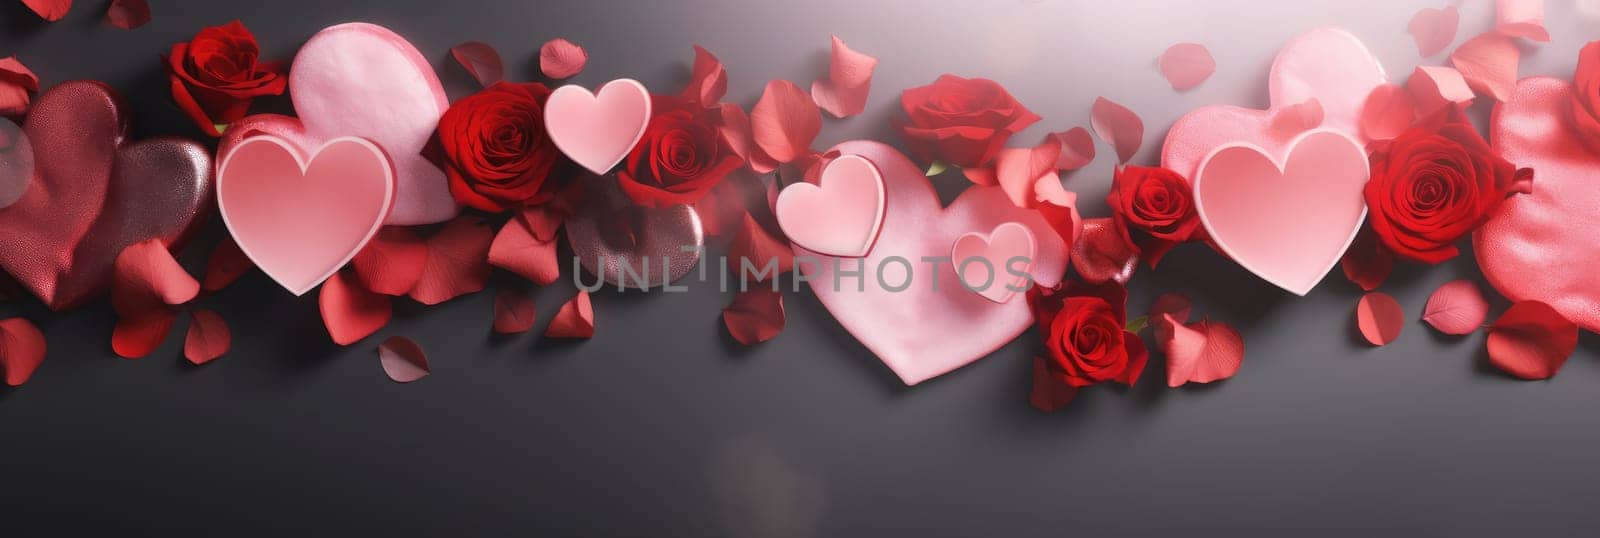 St. Valentines day, wedding banner with abstract illustrated red, pink flying hearts, roses on dark background. Use for cute love sale banners, vouchers or greeting cards. Concept love, copy space. by Angelsmoon